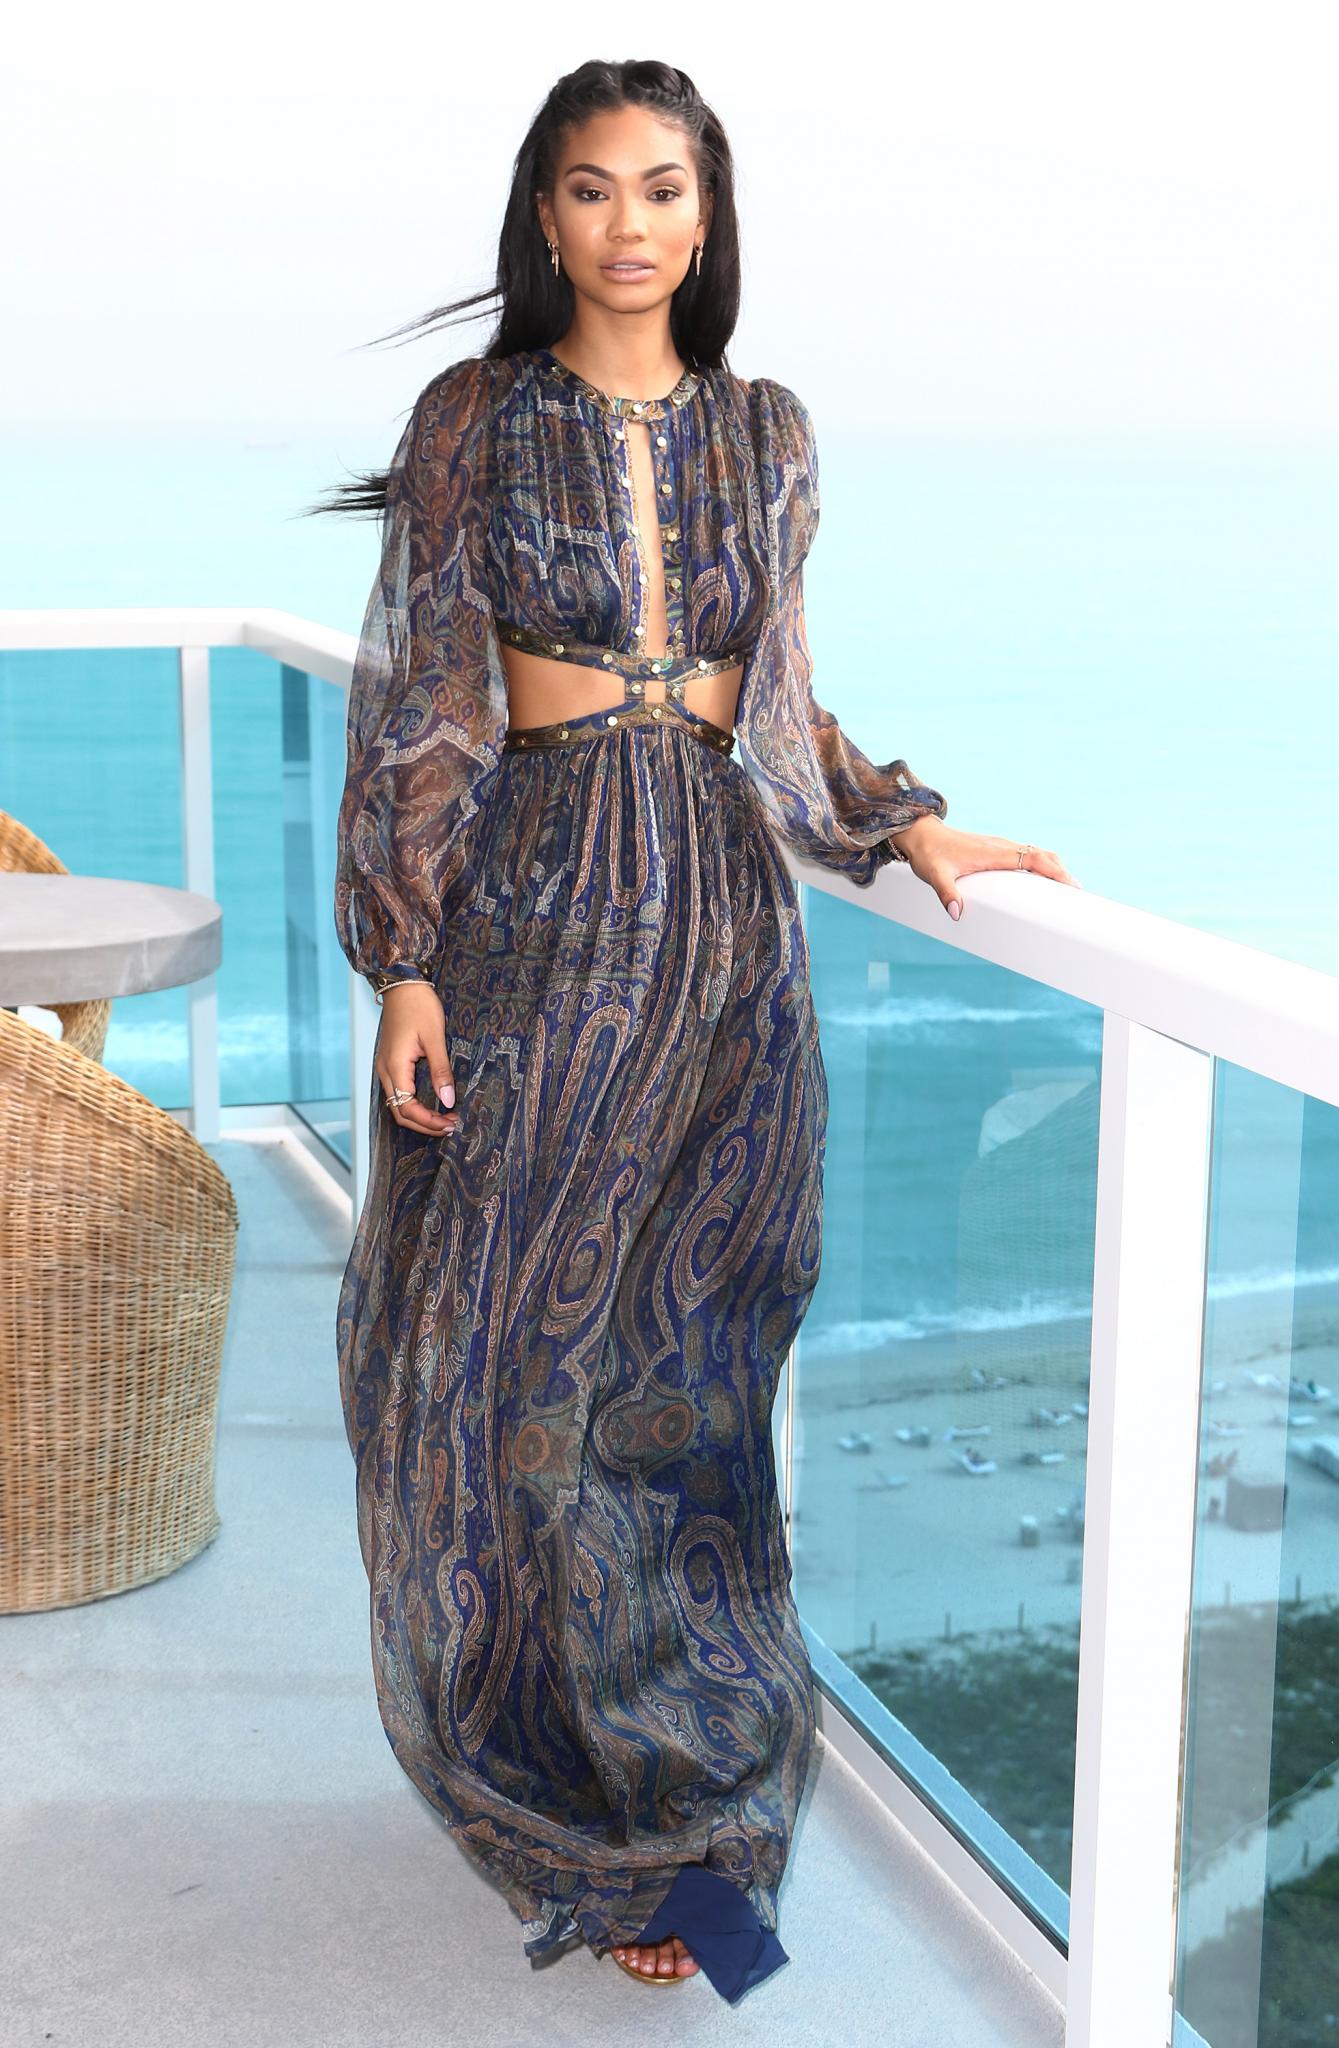 Chanel Iman to Hit the Road for Sports Illustrated Swimsuit 2016 Fun  Festival